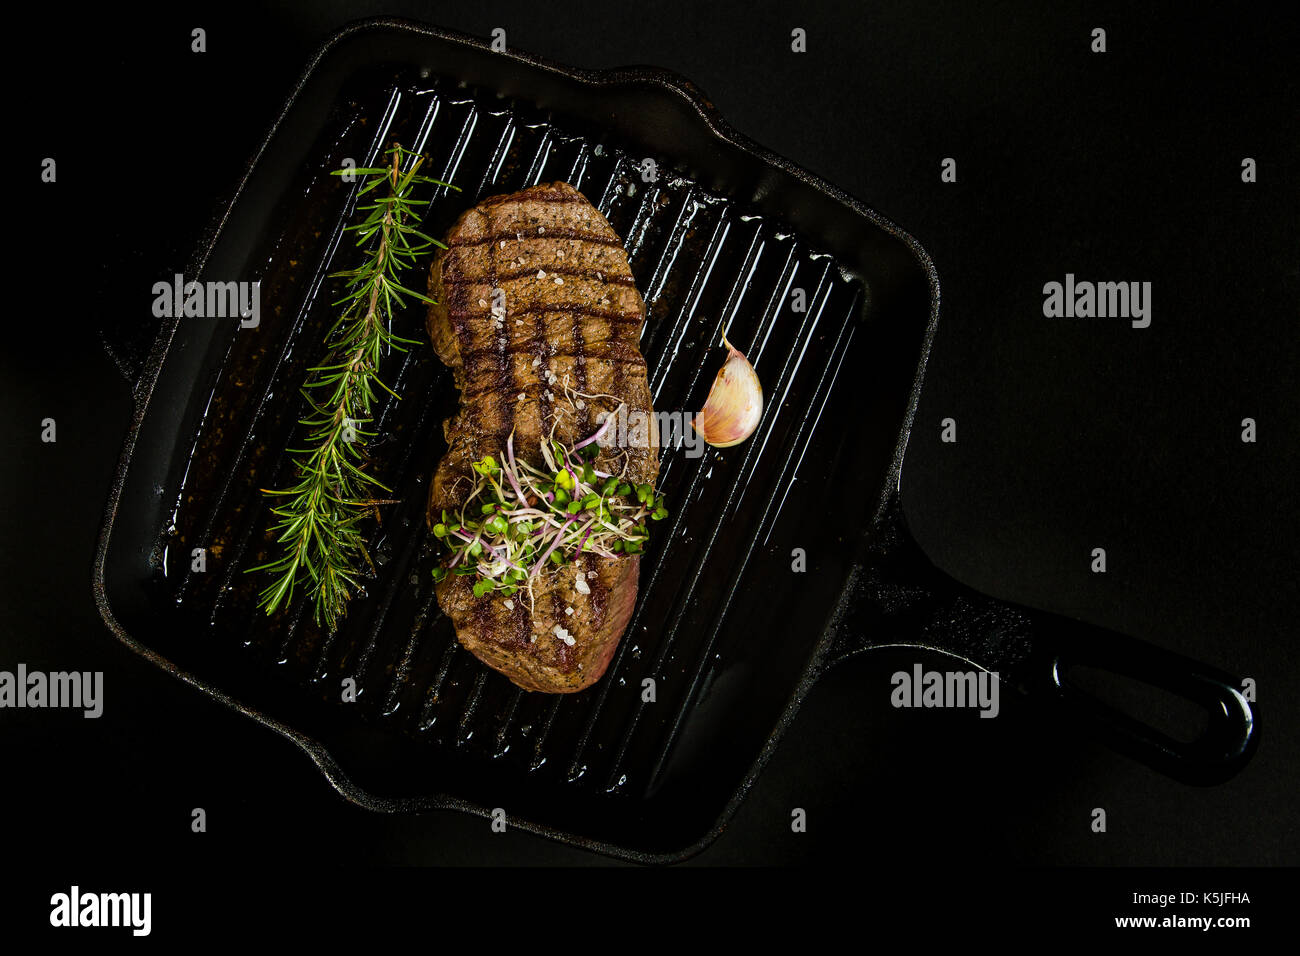 Grilled beef steak in a pan on the black background Stock Photo